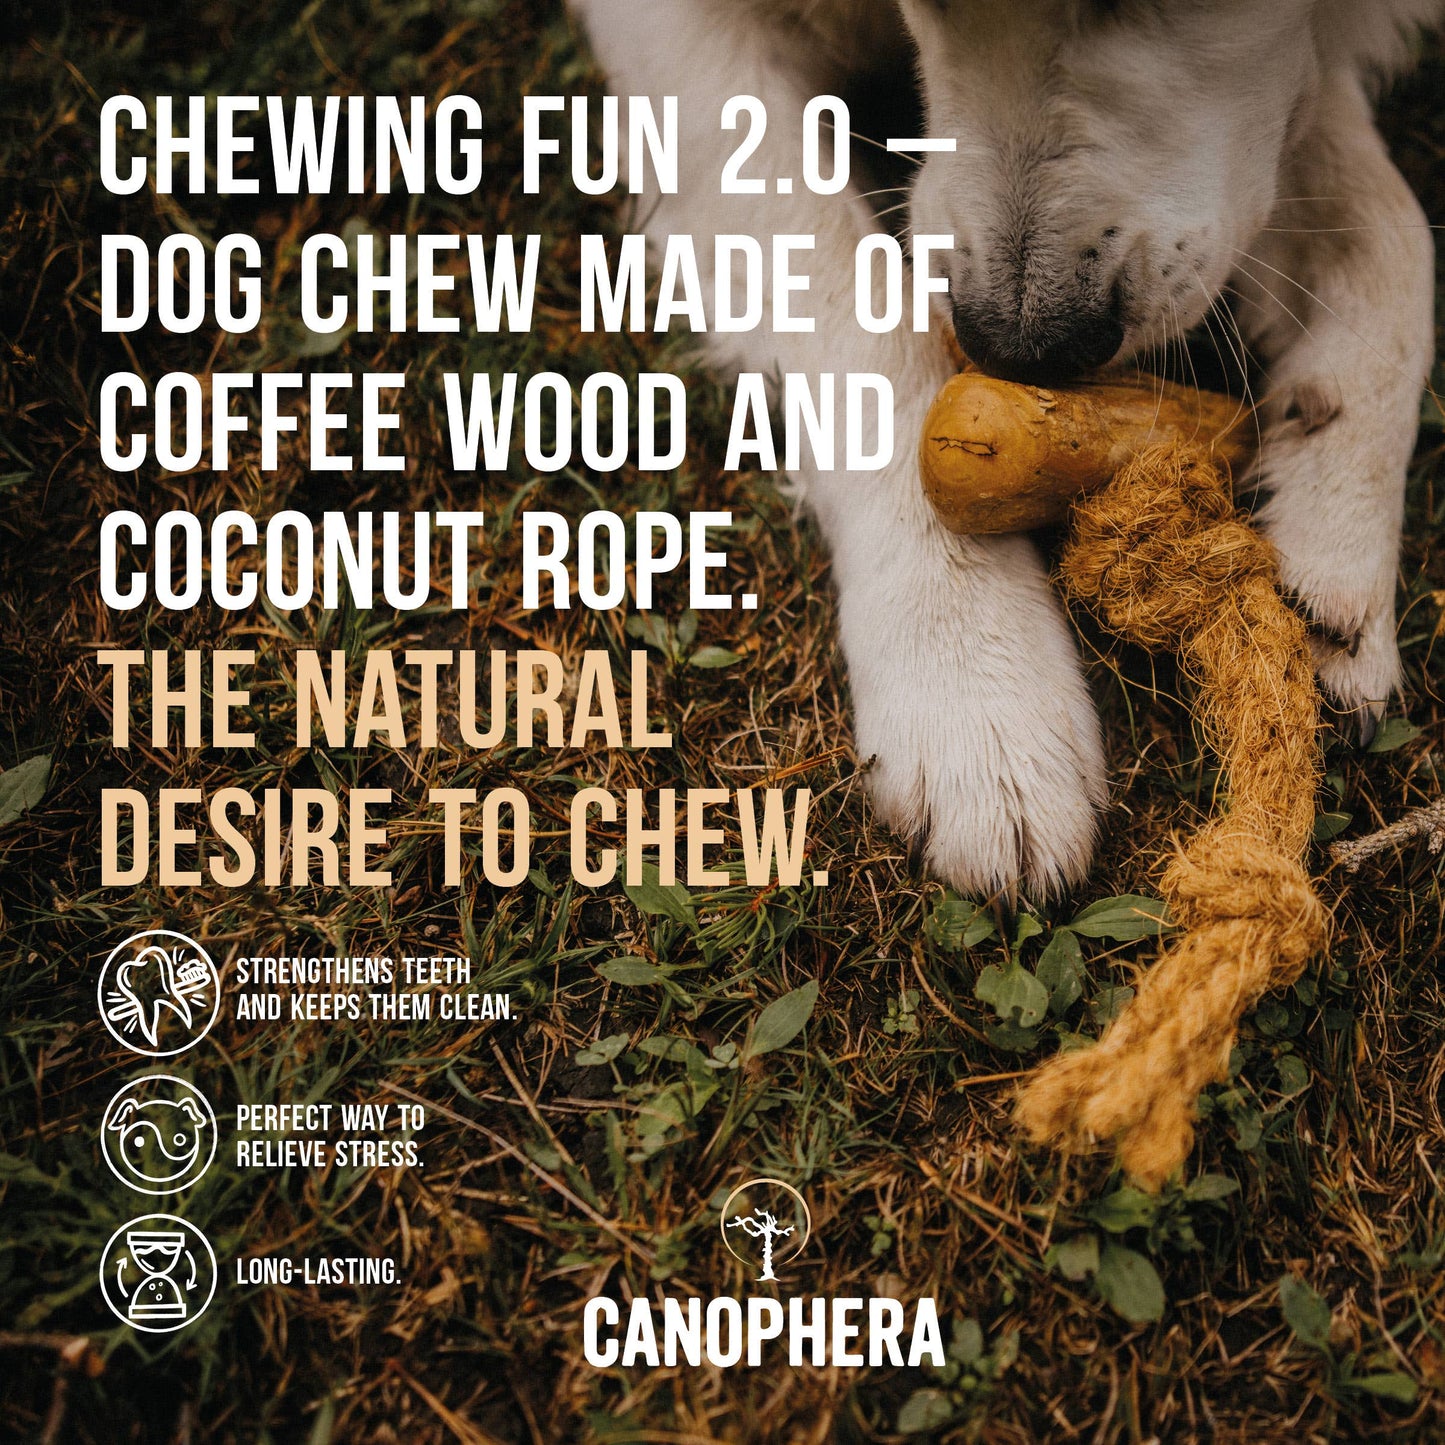 Dog Chew Made of Coffee Wood and Coconut Rope.